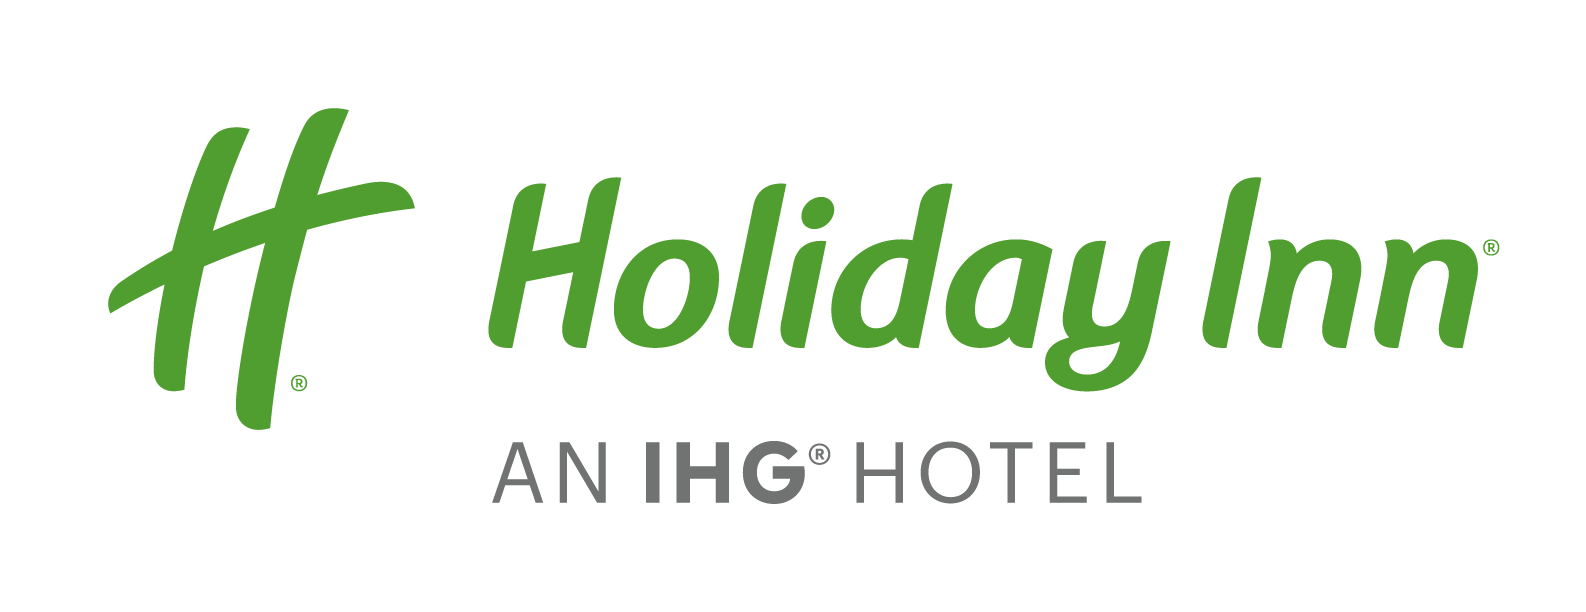 This is the Holiday Inn Logo.